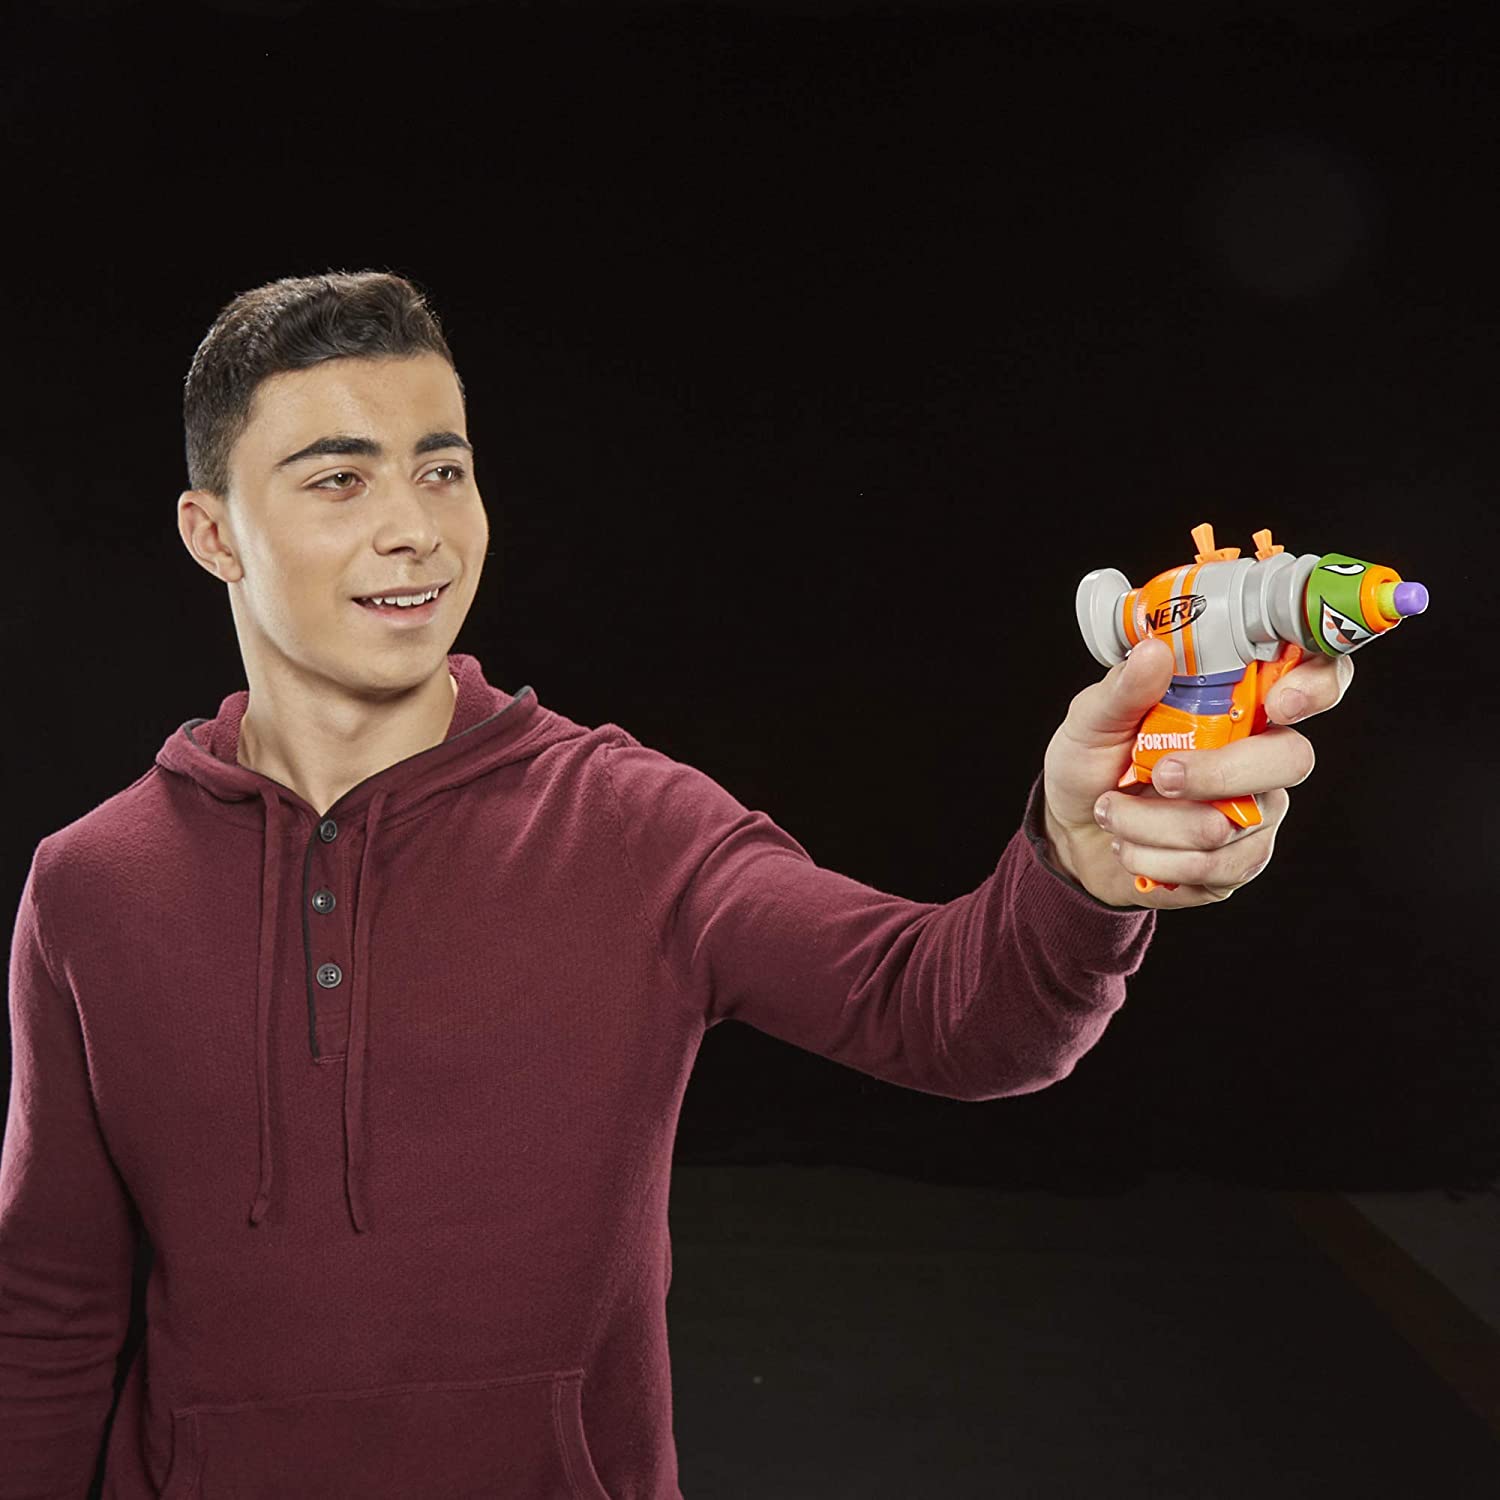 The latest 'Fortnite' Nerf guns include a rocket launcher